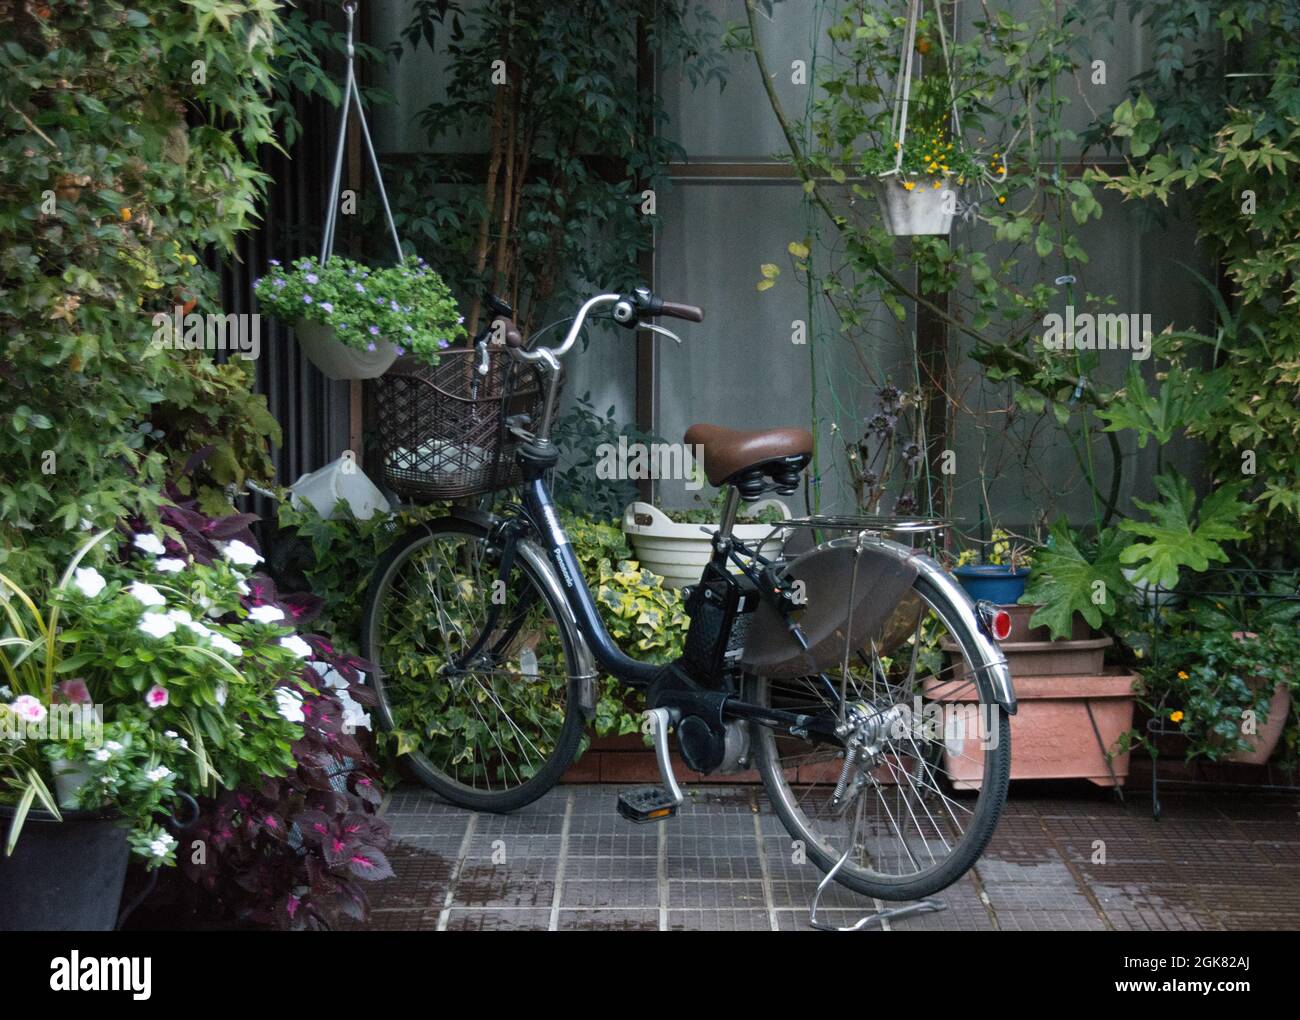 A local person's bicycle parked in amongst pot plants on a patio, Kyoto, Japan Stock Photo